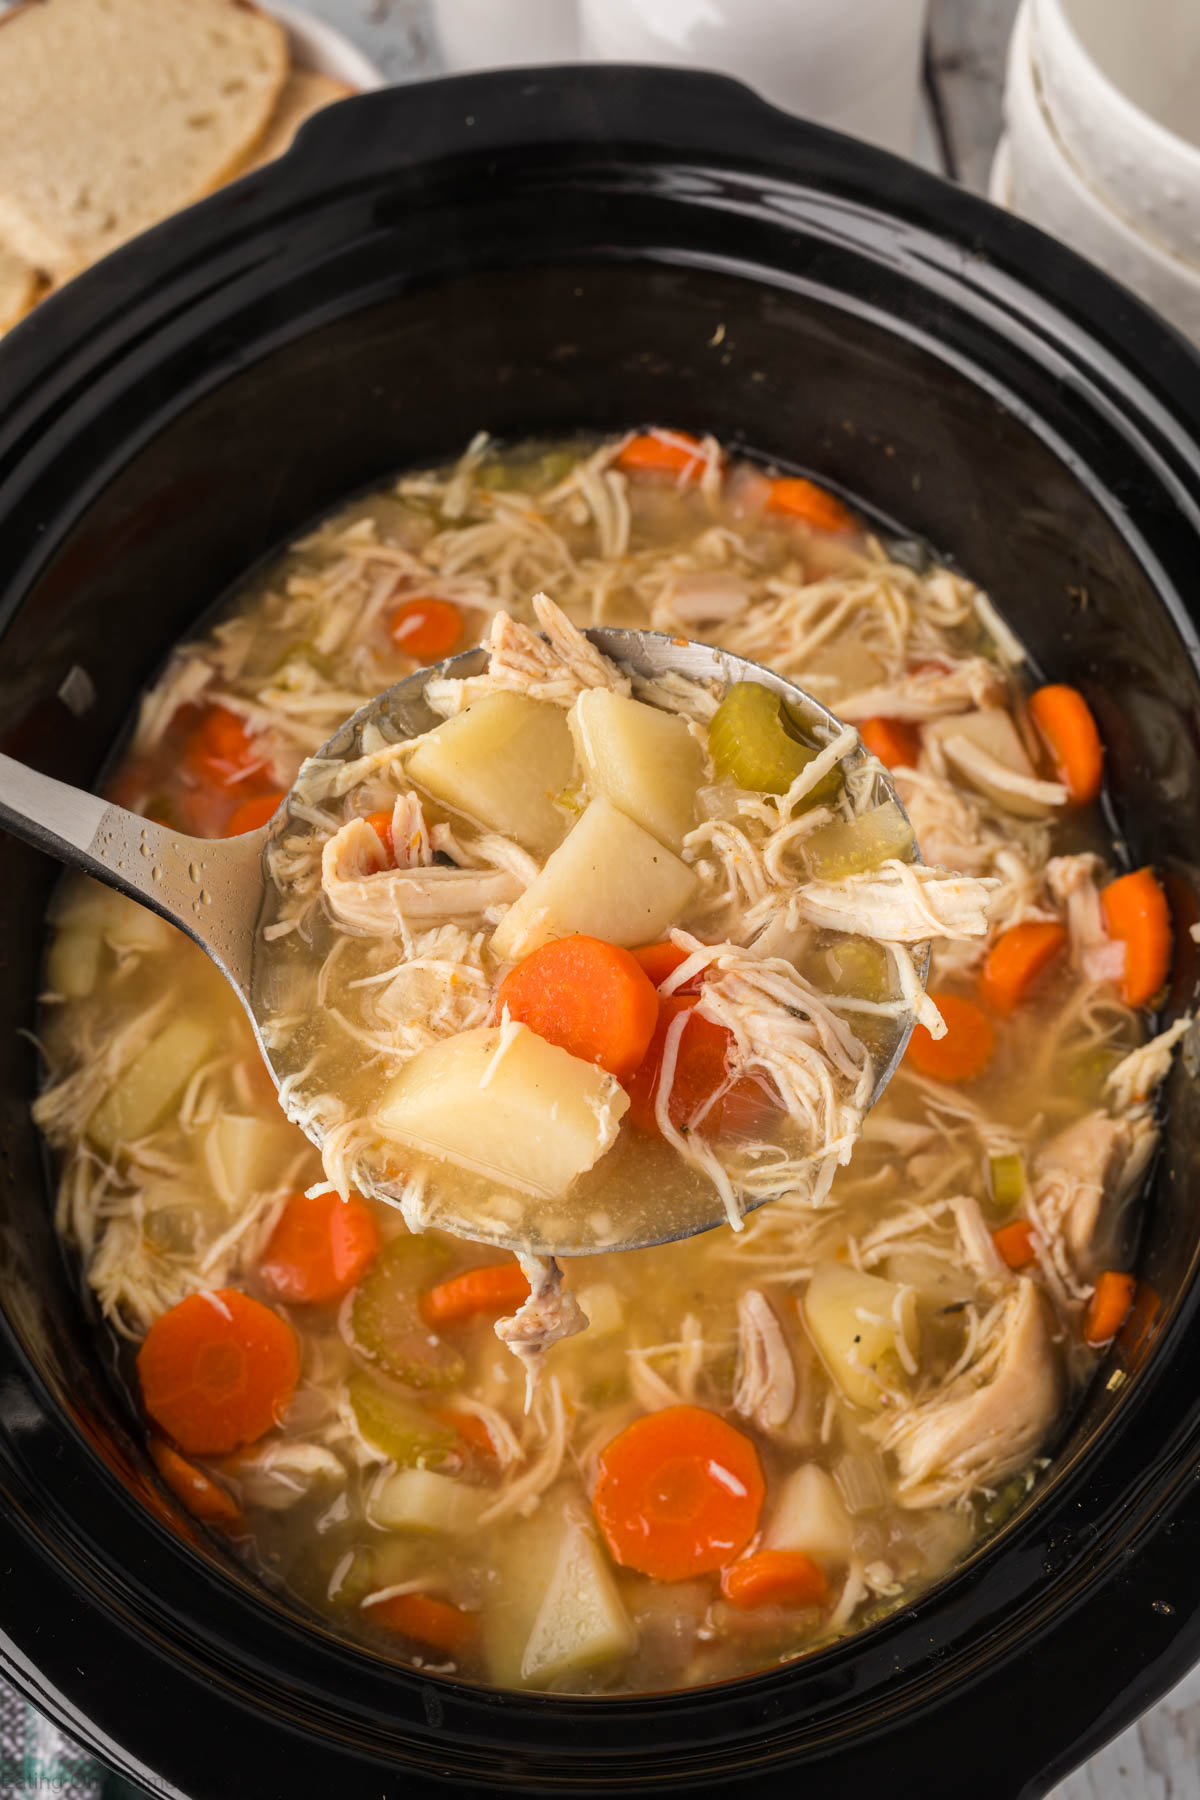 Chicken stew in the slow cooker with a serving on the ladle